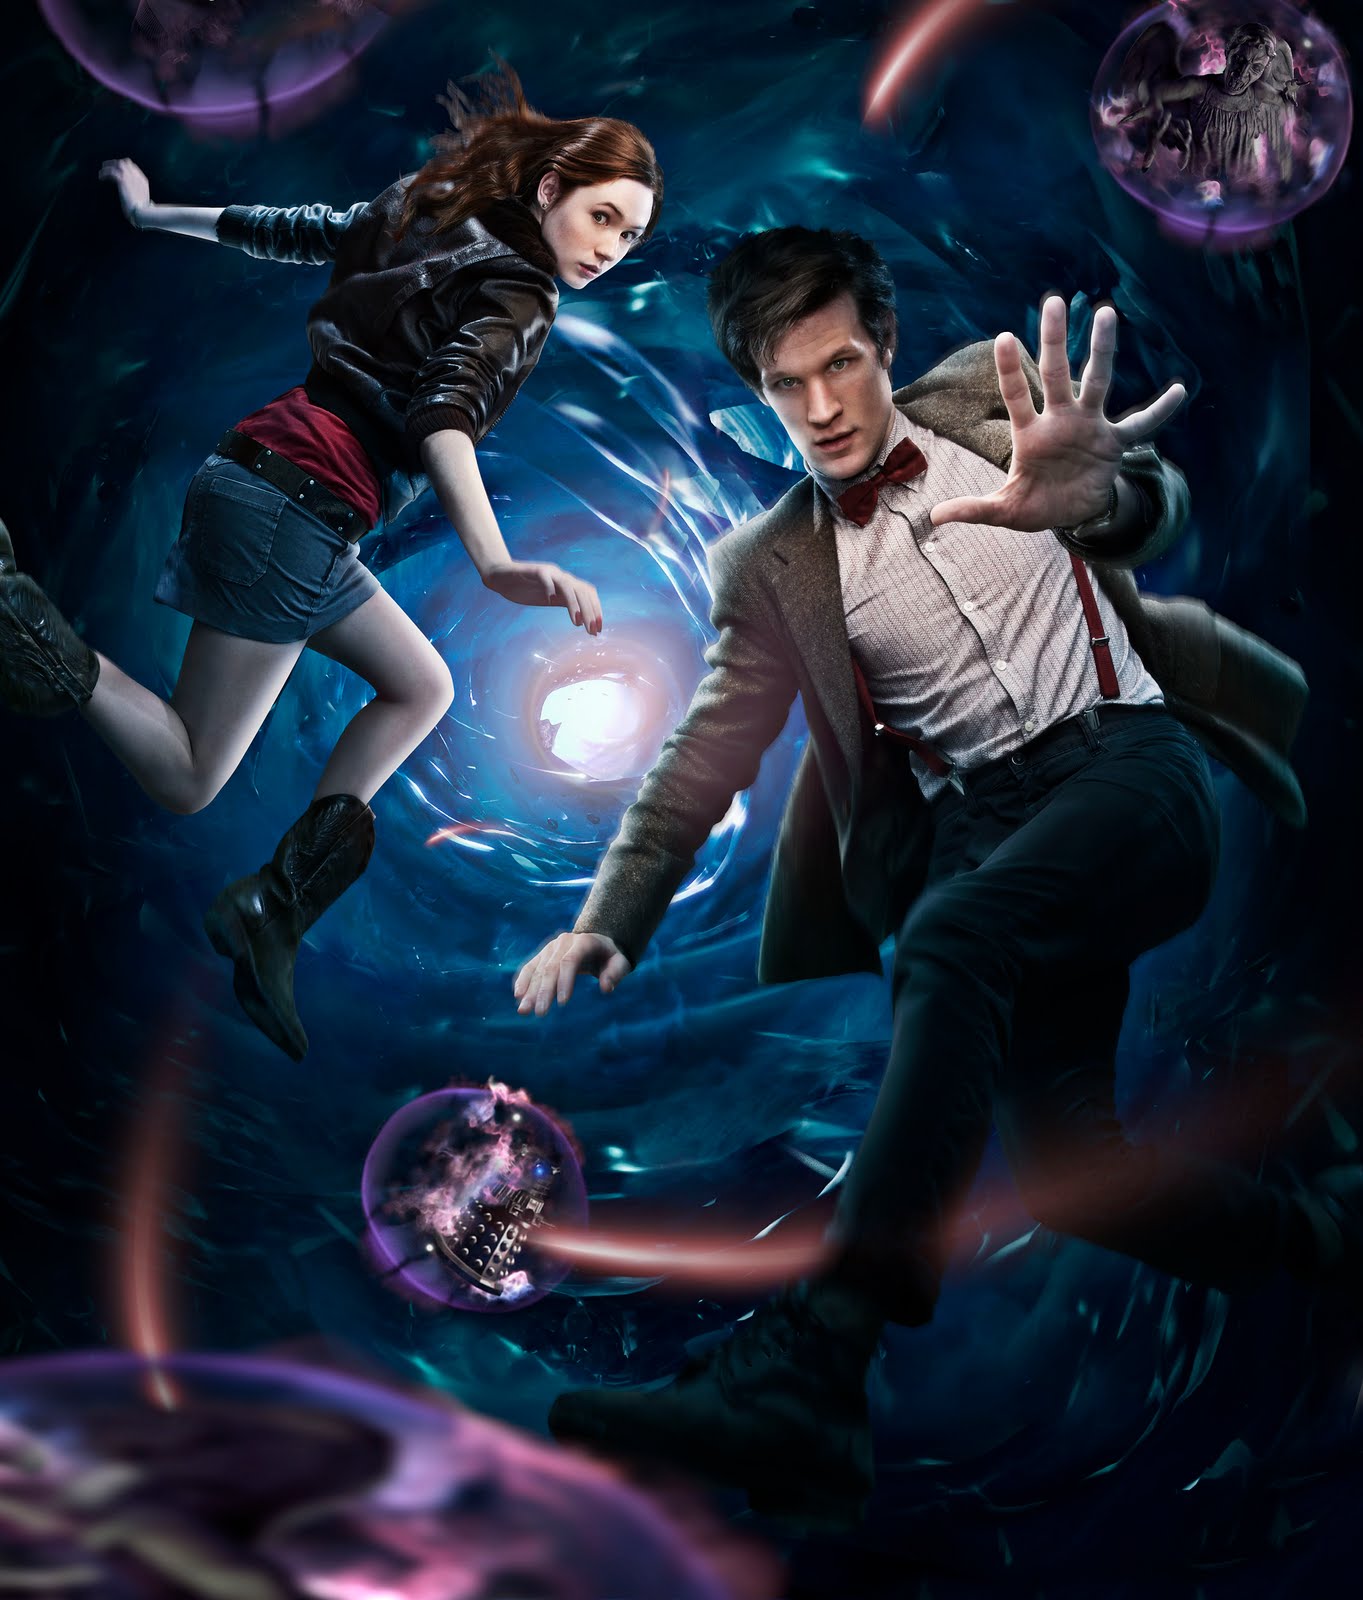 Doctor Who Series 5